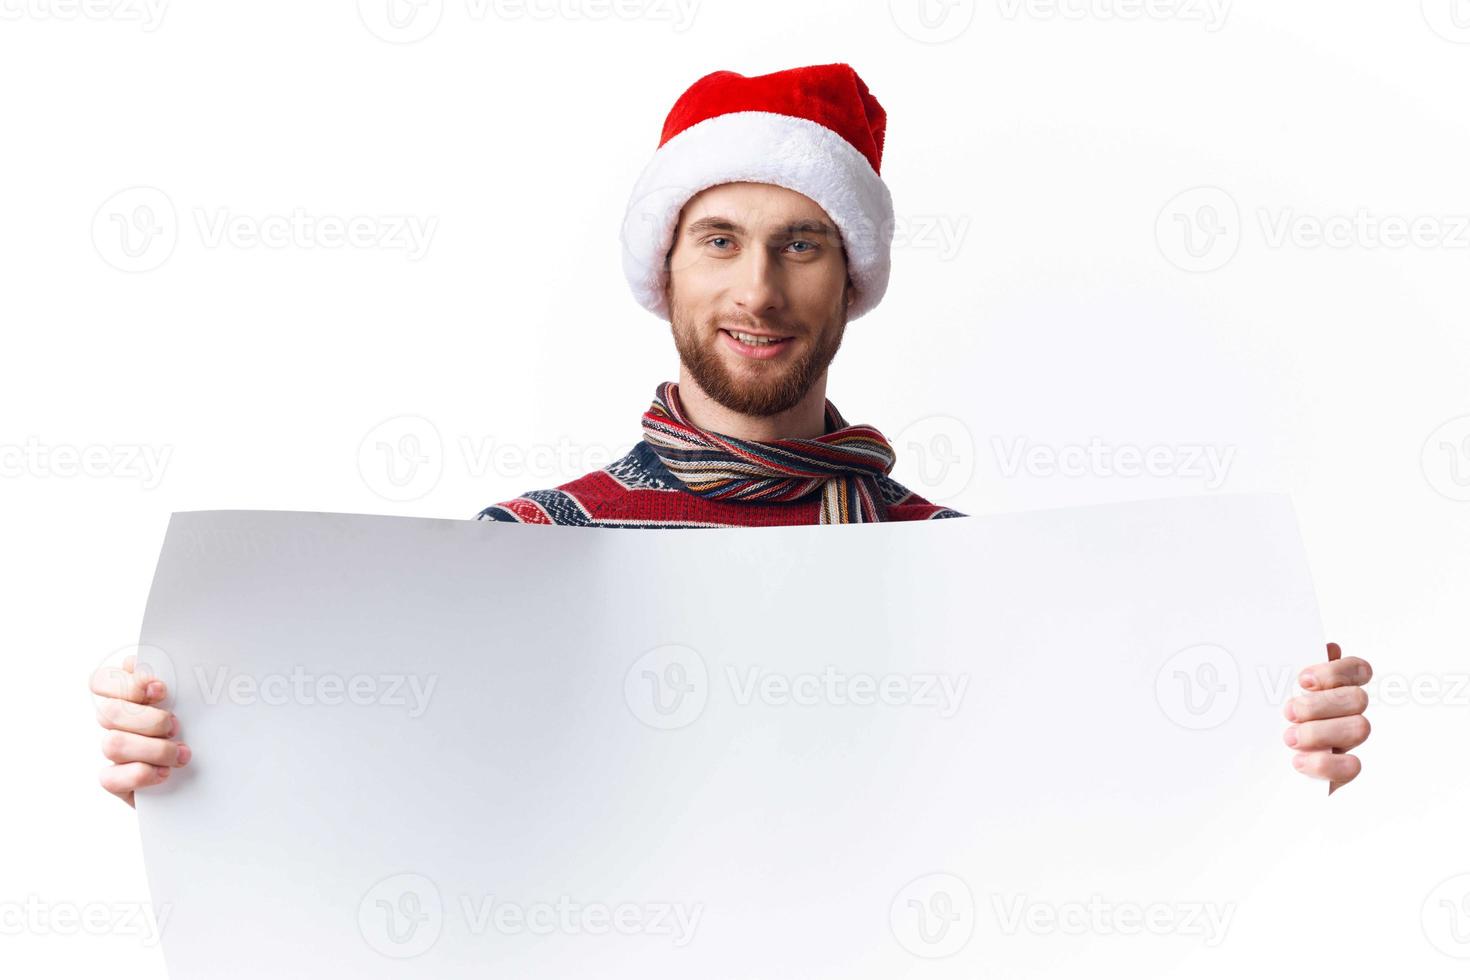 emotional man in New Year's clothes holding a banner holiday isolated background photo